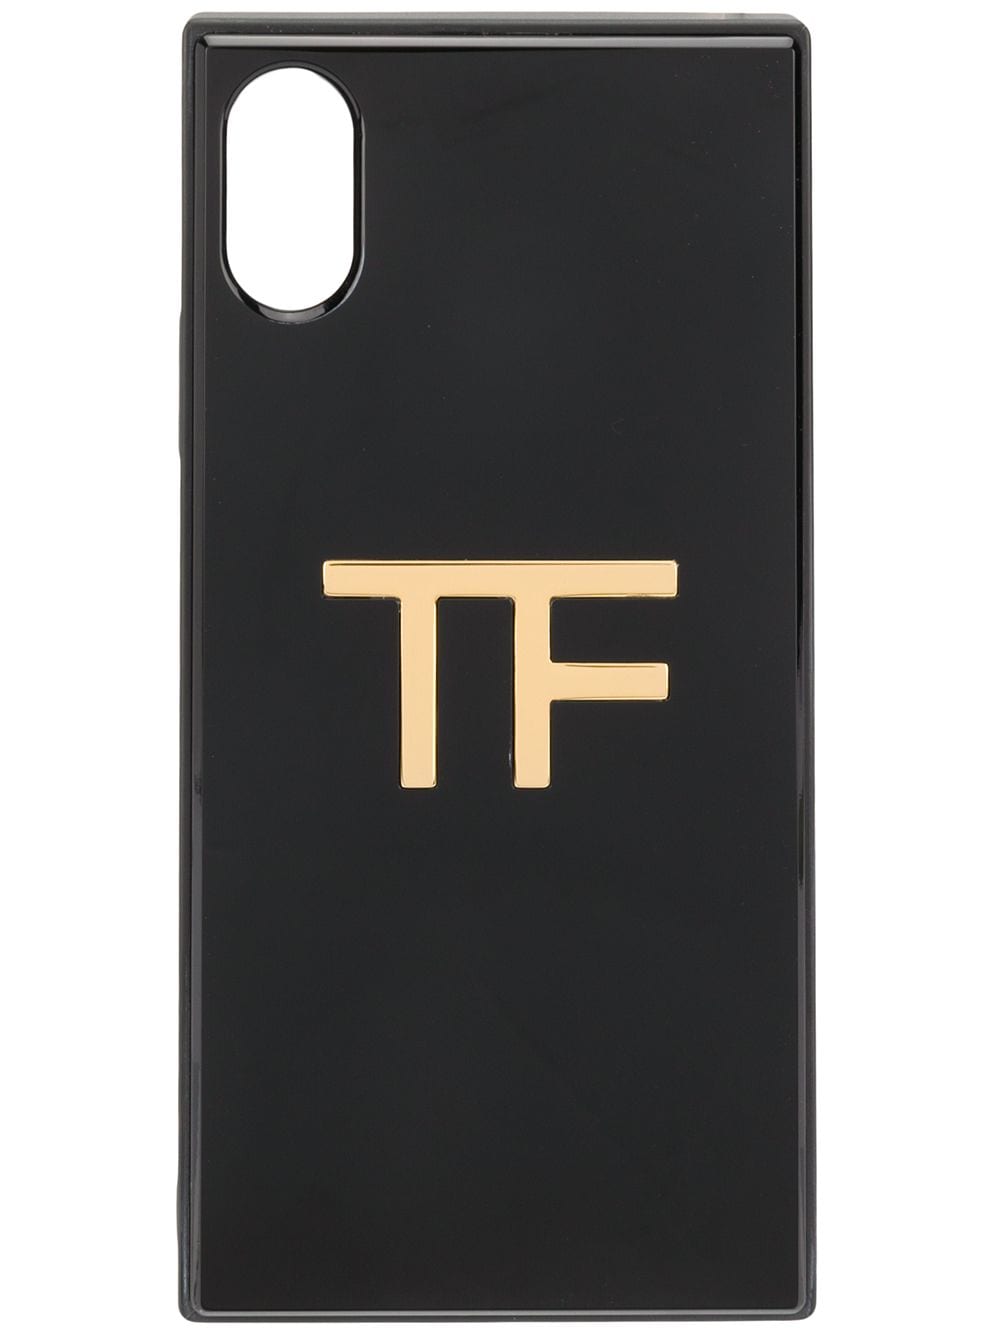 TOM FORD logo iPhone X case